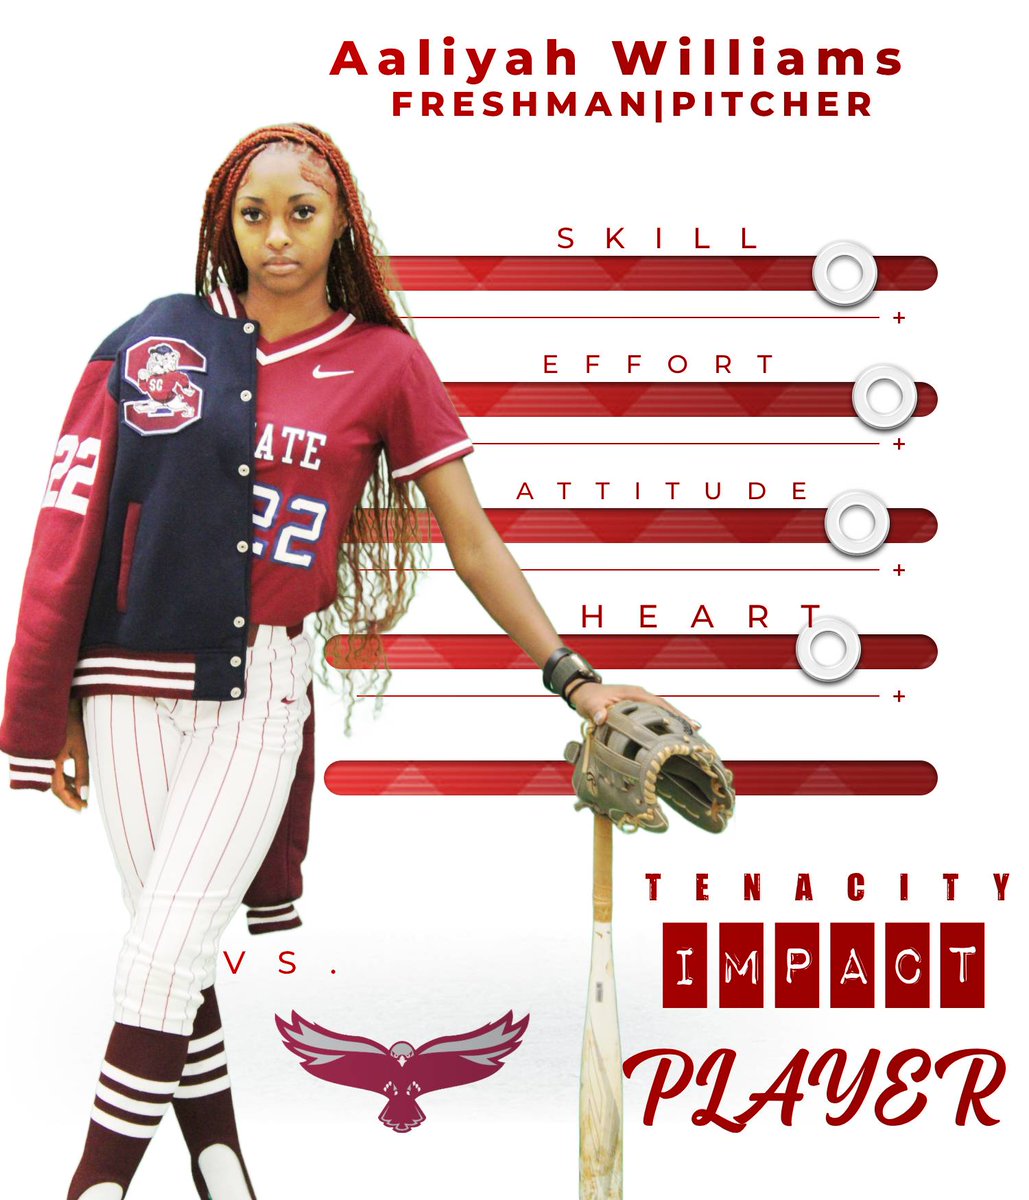 TENACITY IMPACT PLAYER OF THE WEEK Aaliyah Williams freshmen pitcher played seven (7) innings, faced 29 batters allowing two (2) hits with 0 runs earned and 12 strikeouts. The Lady Bulldogs posted 21 strikeouts with William’s accounting for 14 along with two ground ball outs.